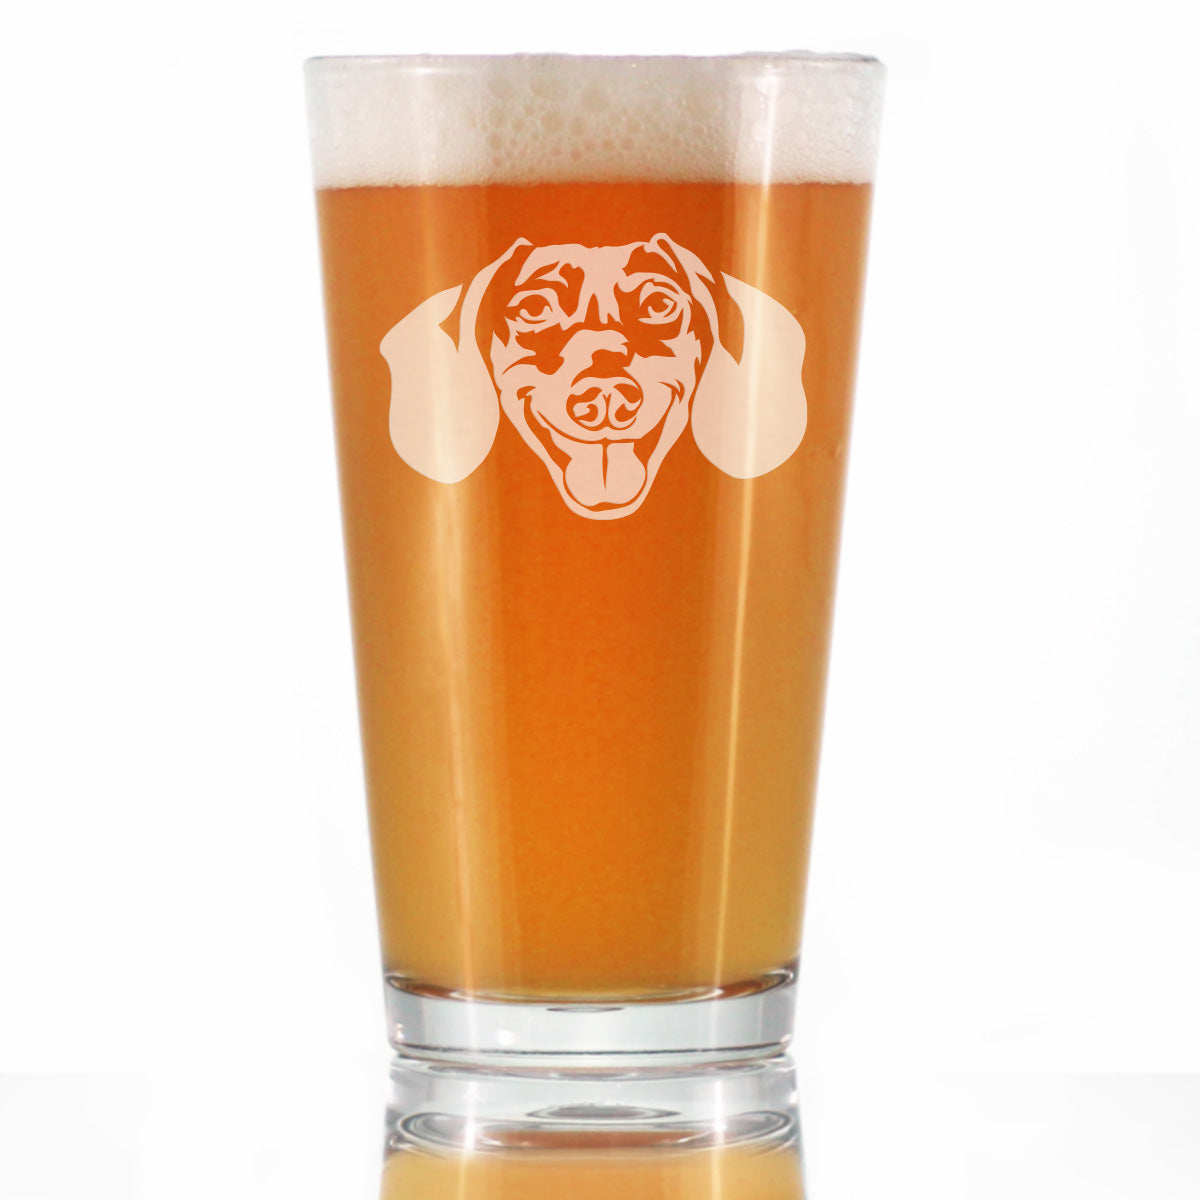 Dachshund Face Pint Glass for Beer - Unique Dog Themed Decor and Gifts for Moms &amp; Dads of Dachshunds - 16 Oz